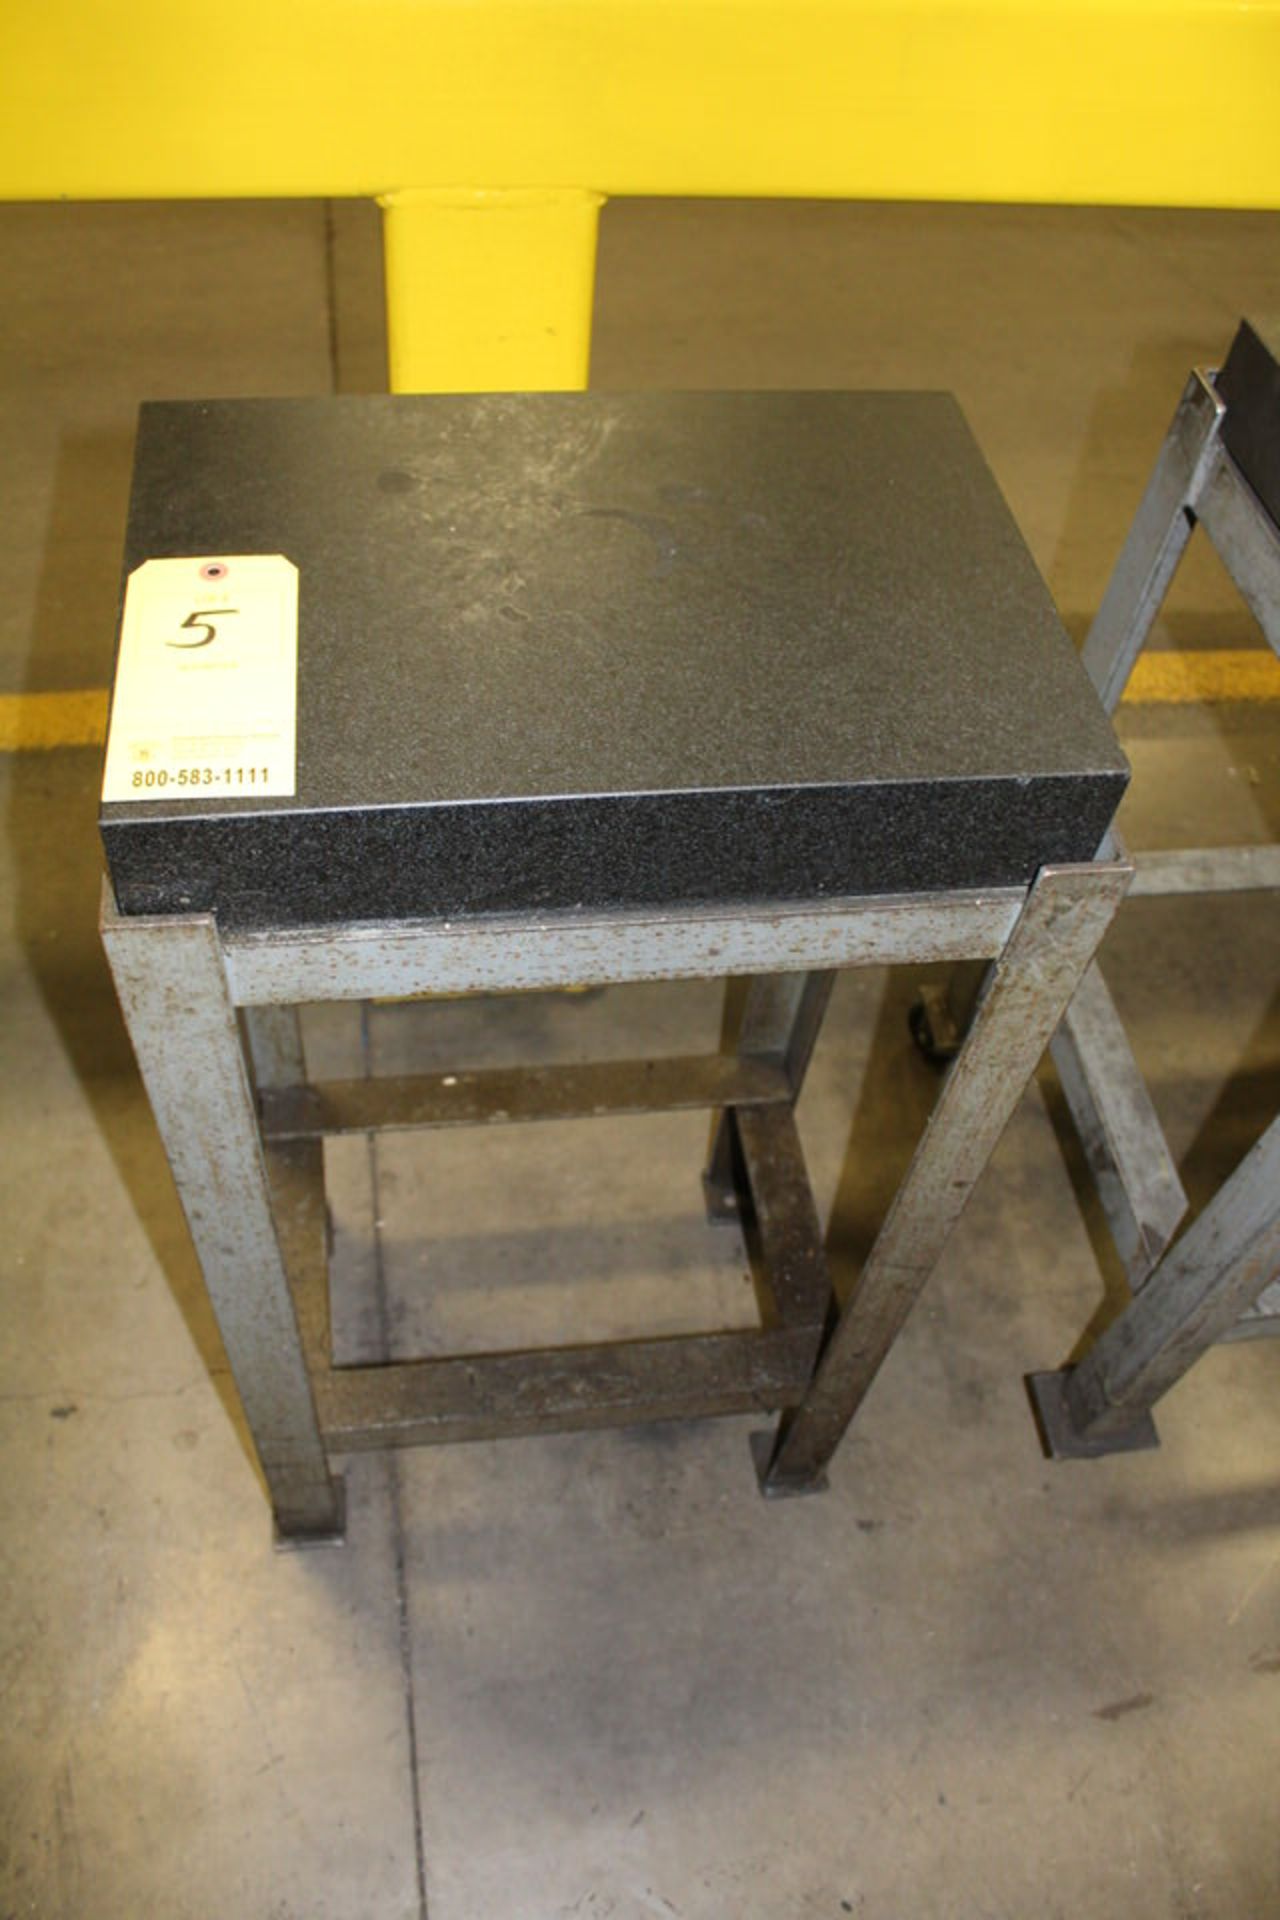 18" X 12" X 3 1/2" GRANITE SURFACE PLATE W/ STANDS